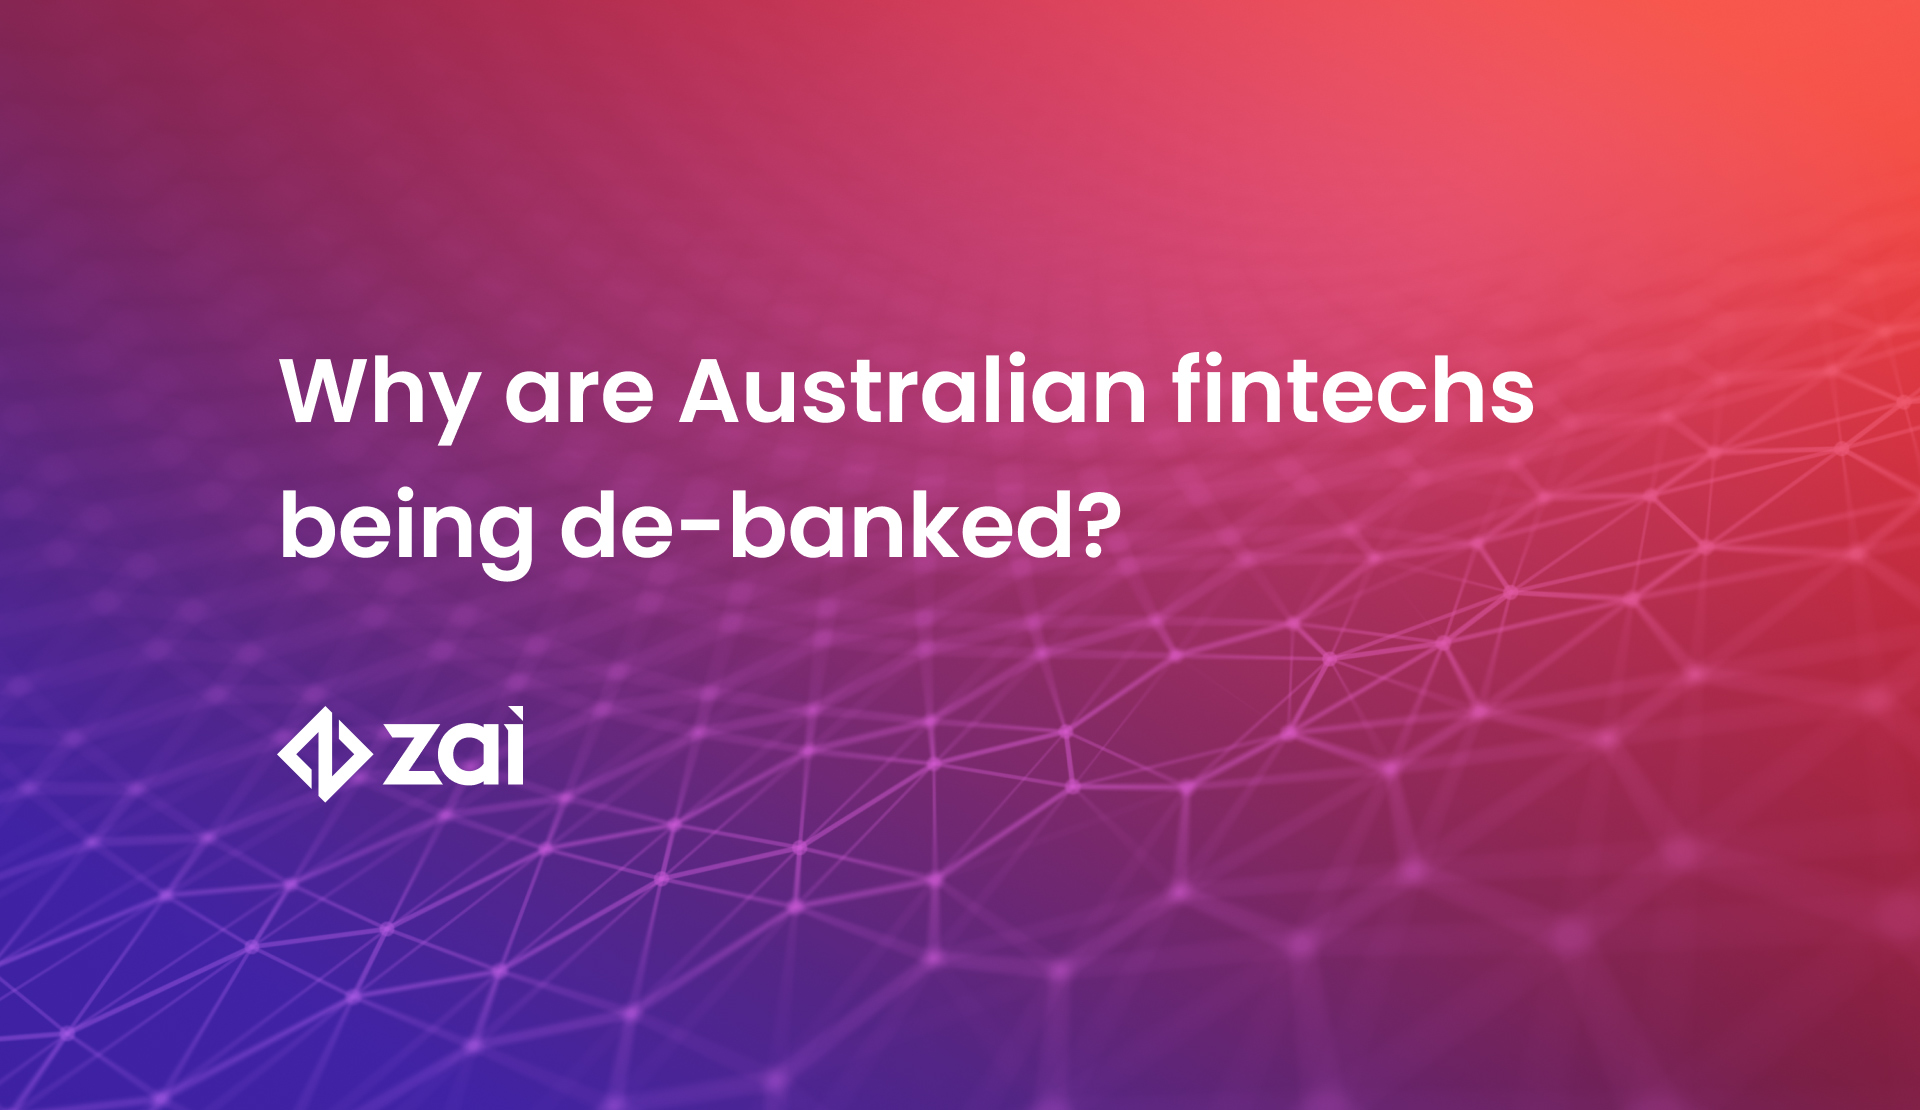 Why are Australian fintechs being de-banked and what can they do about it?